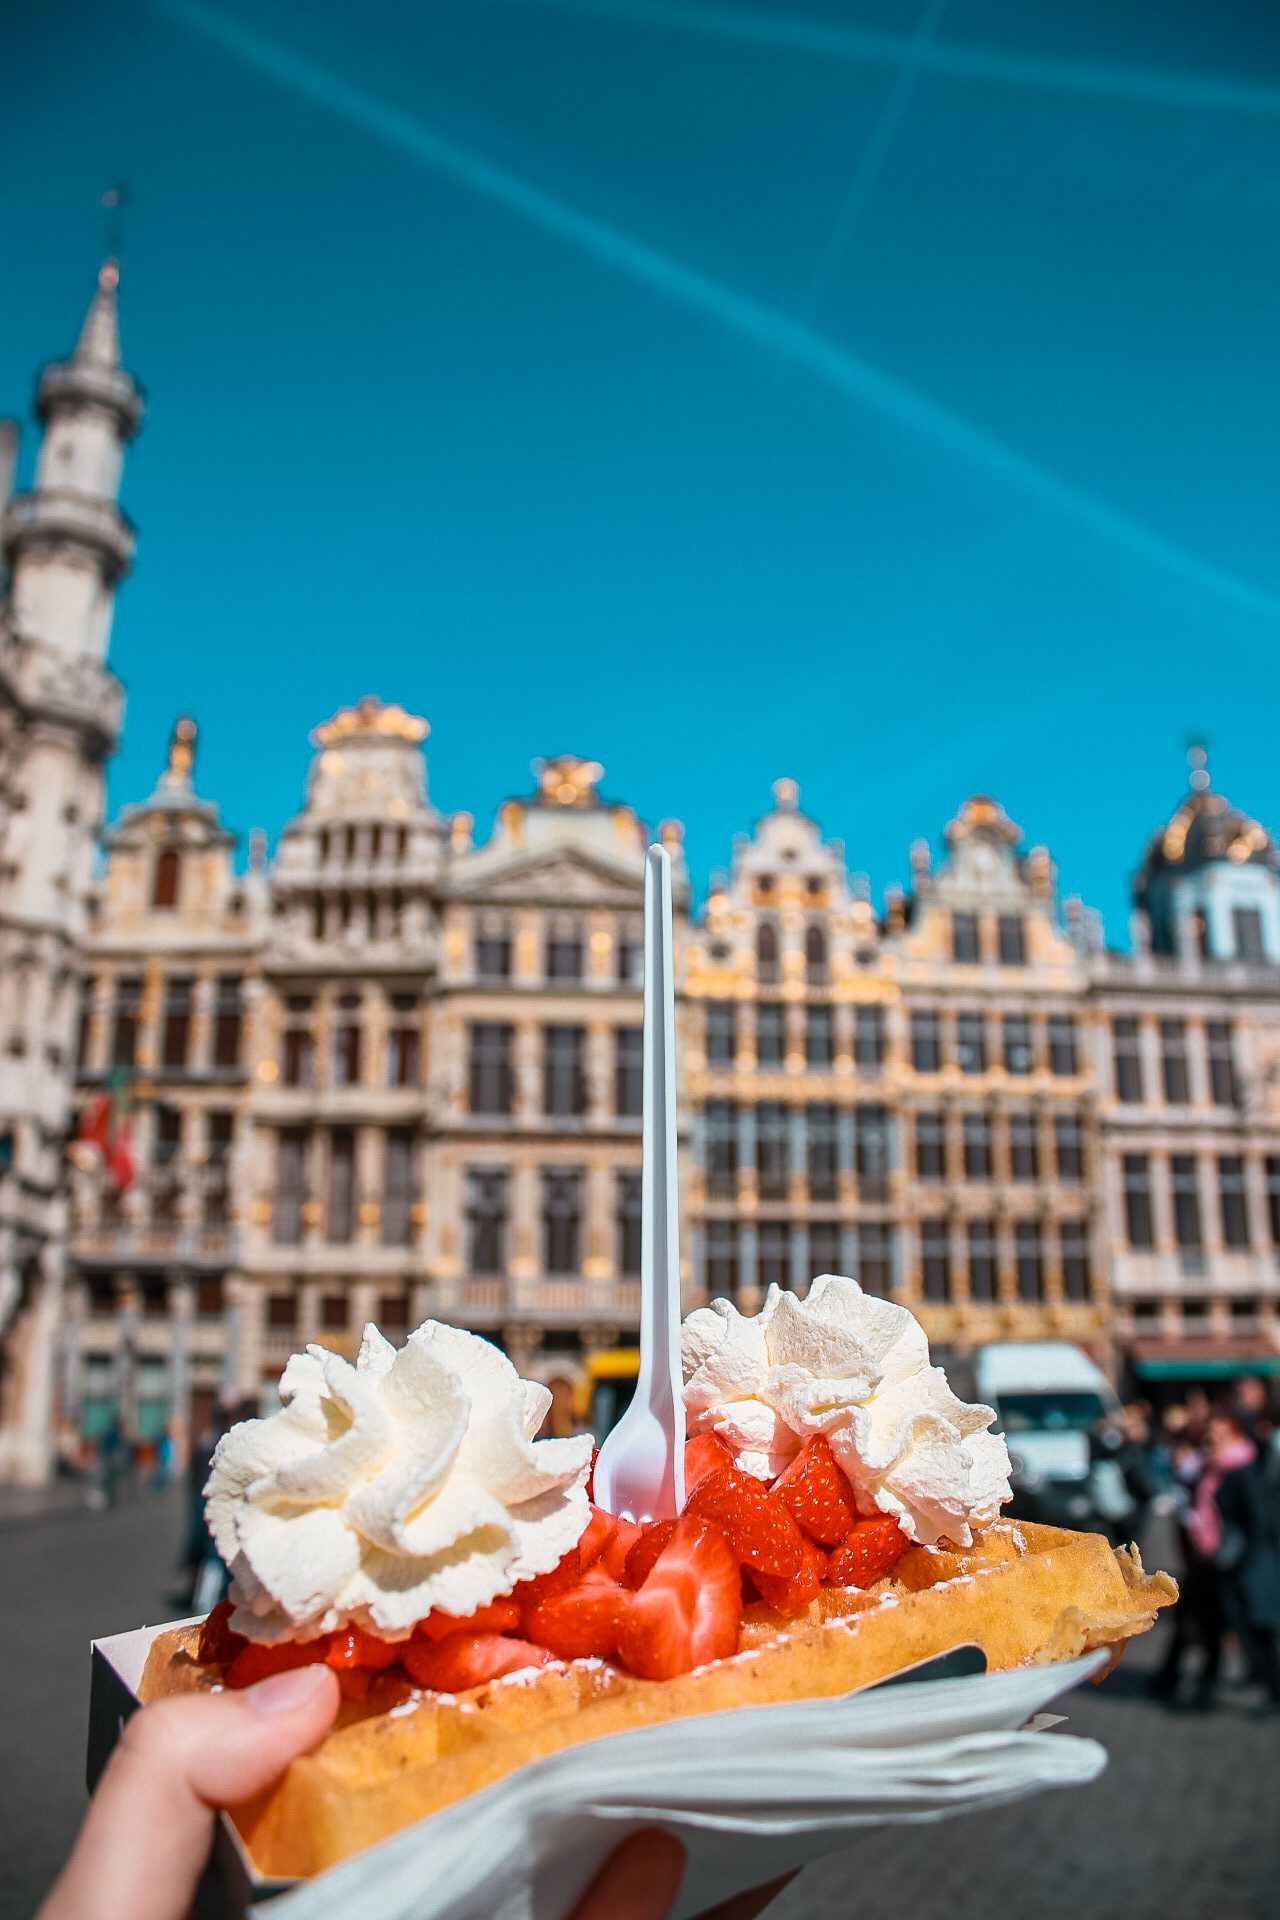 Belgian Waffle in front of Brussels Grand place
Perfect 2 day Brussels itinerary